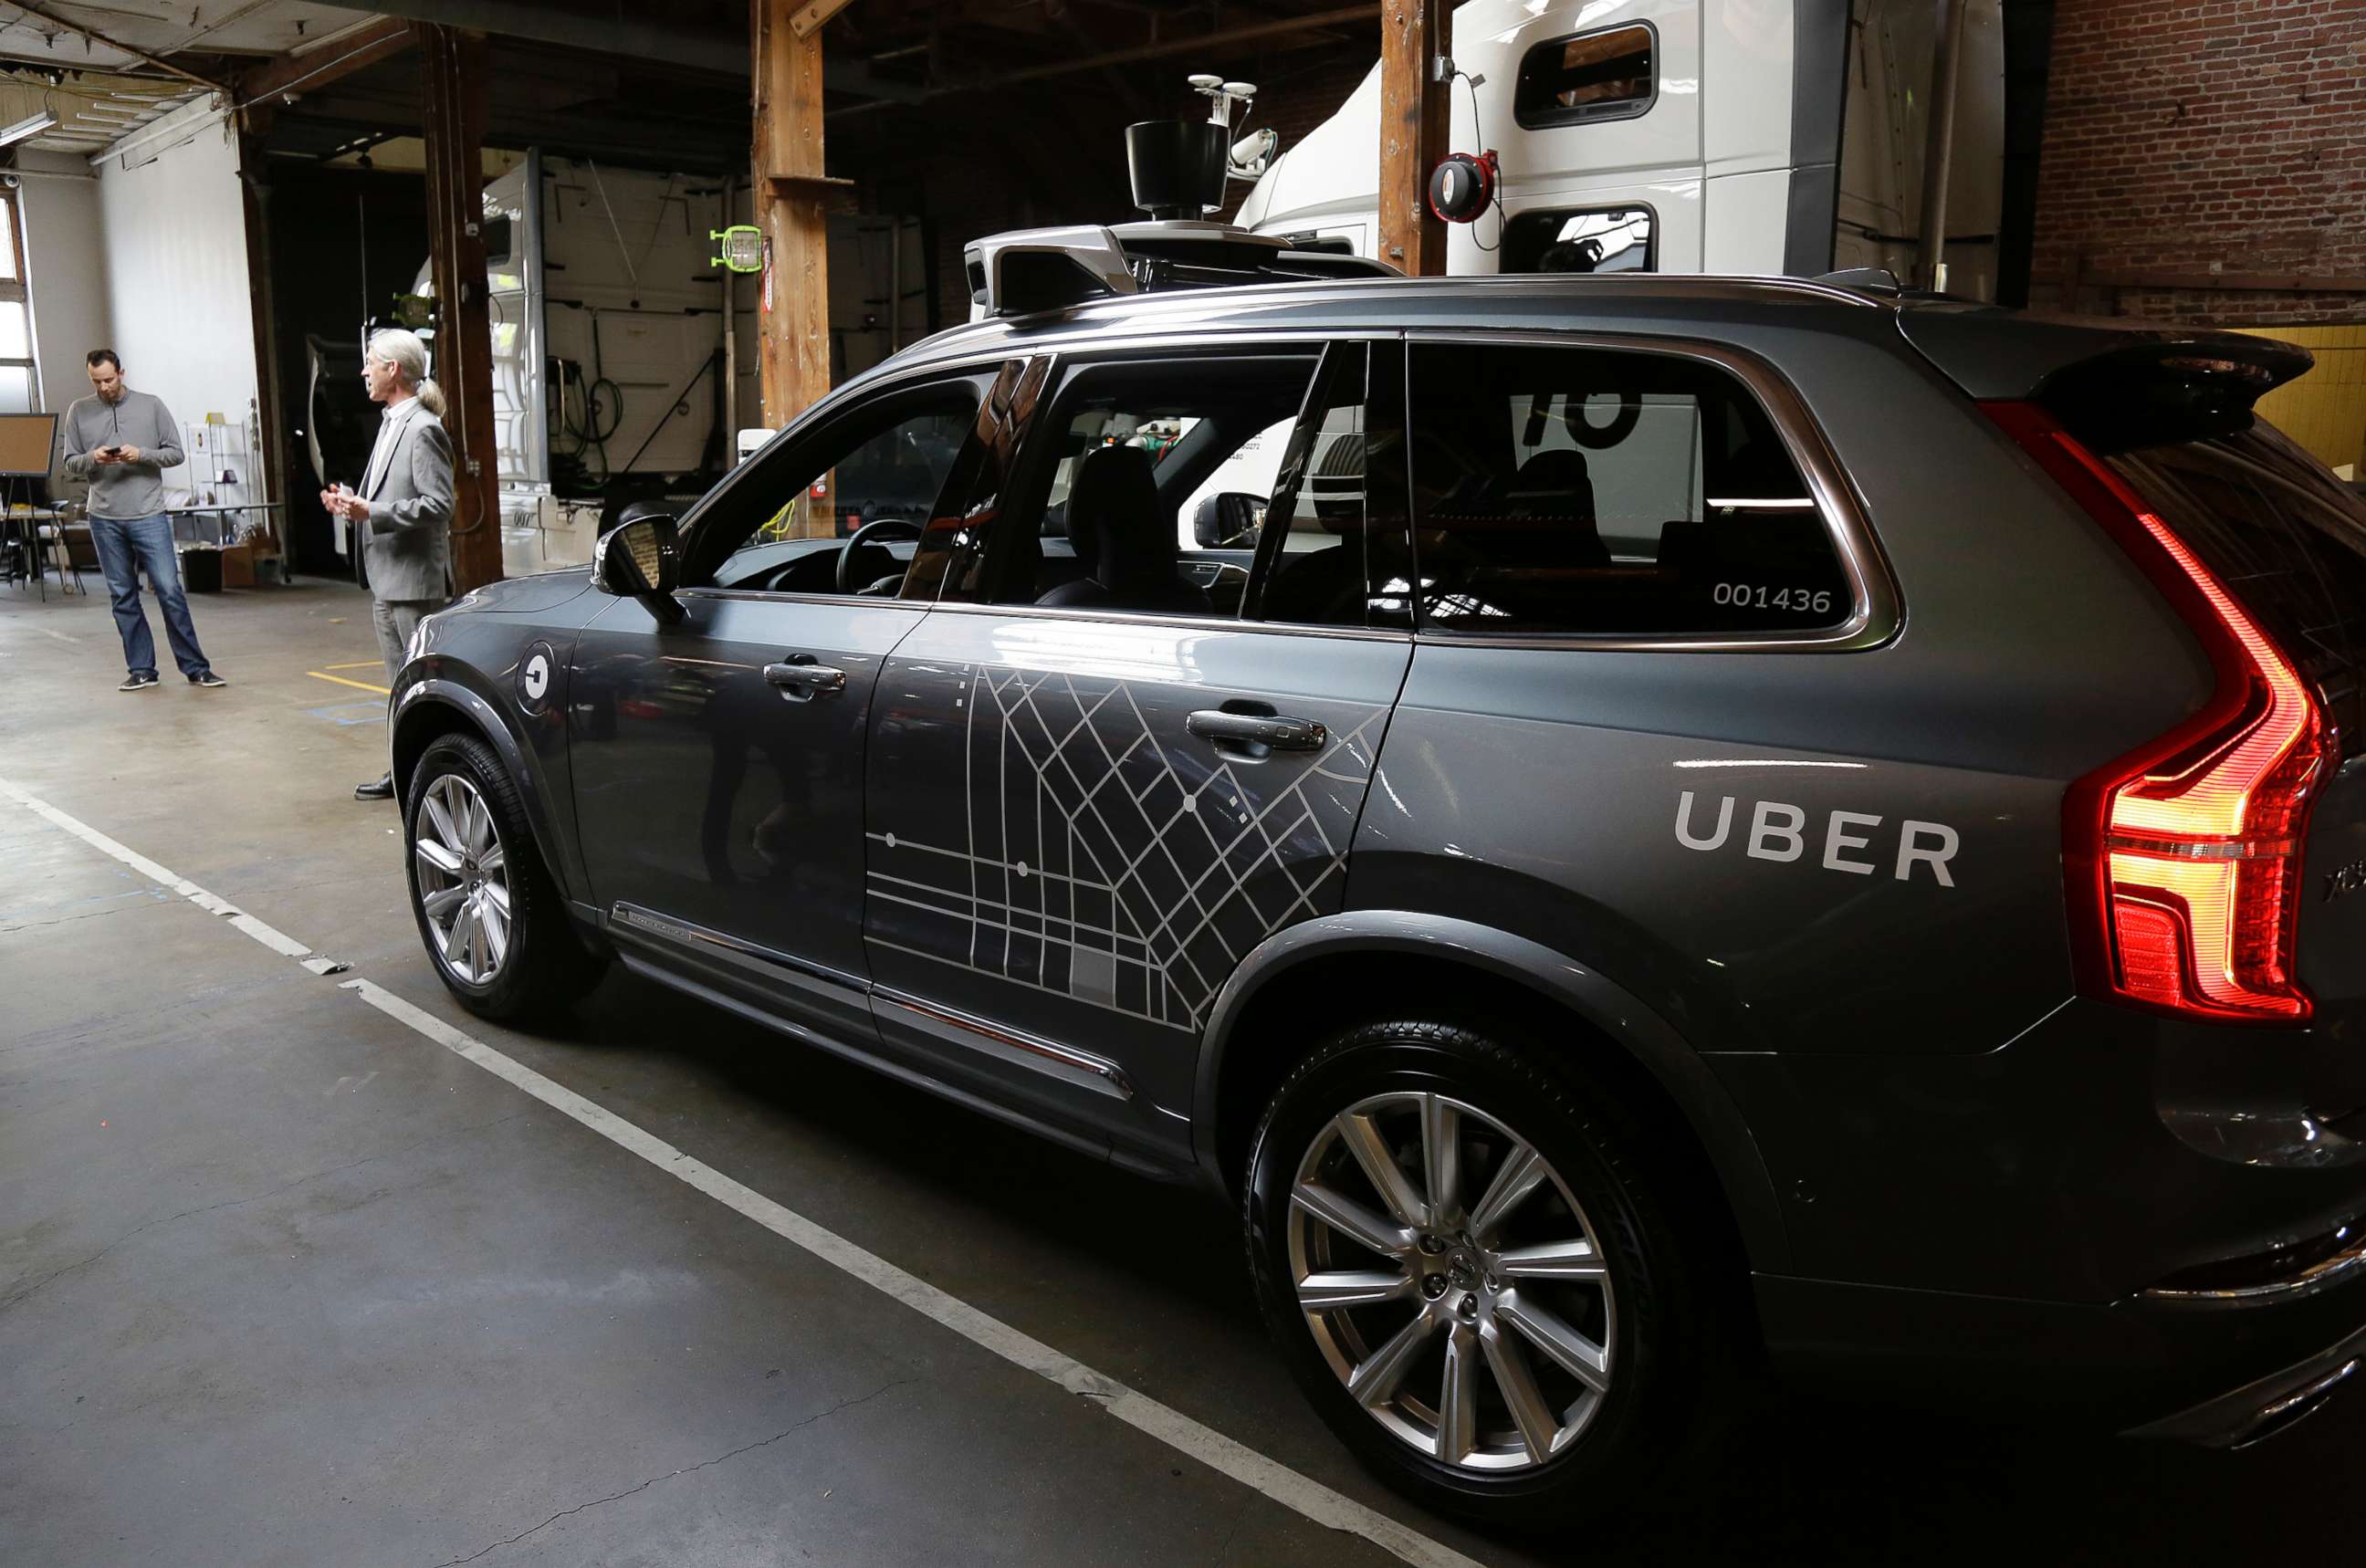 PHOTO: In this Dec. 13, 2016 file photo, an Uber driverless car is displayed in a garage in San Francisco. 